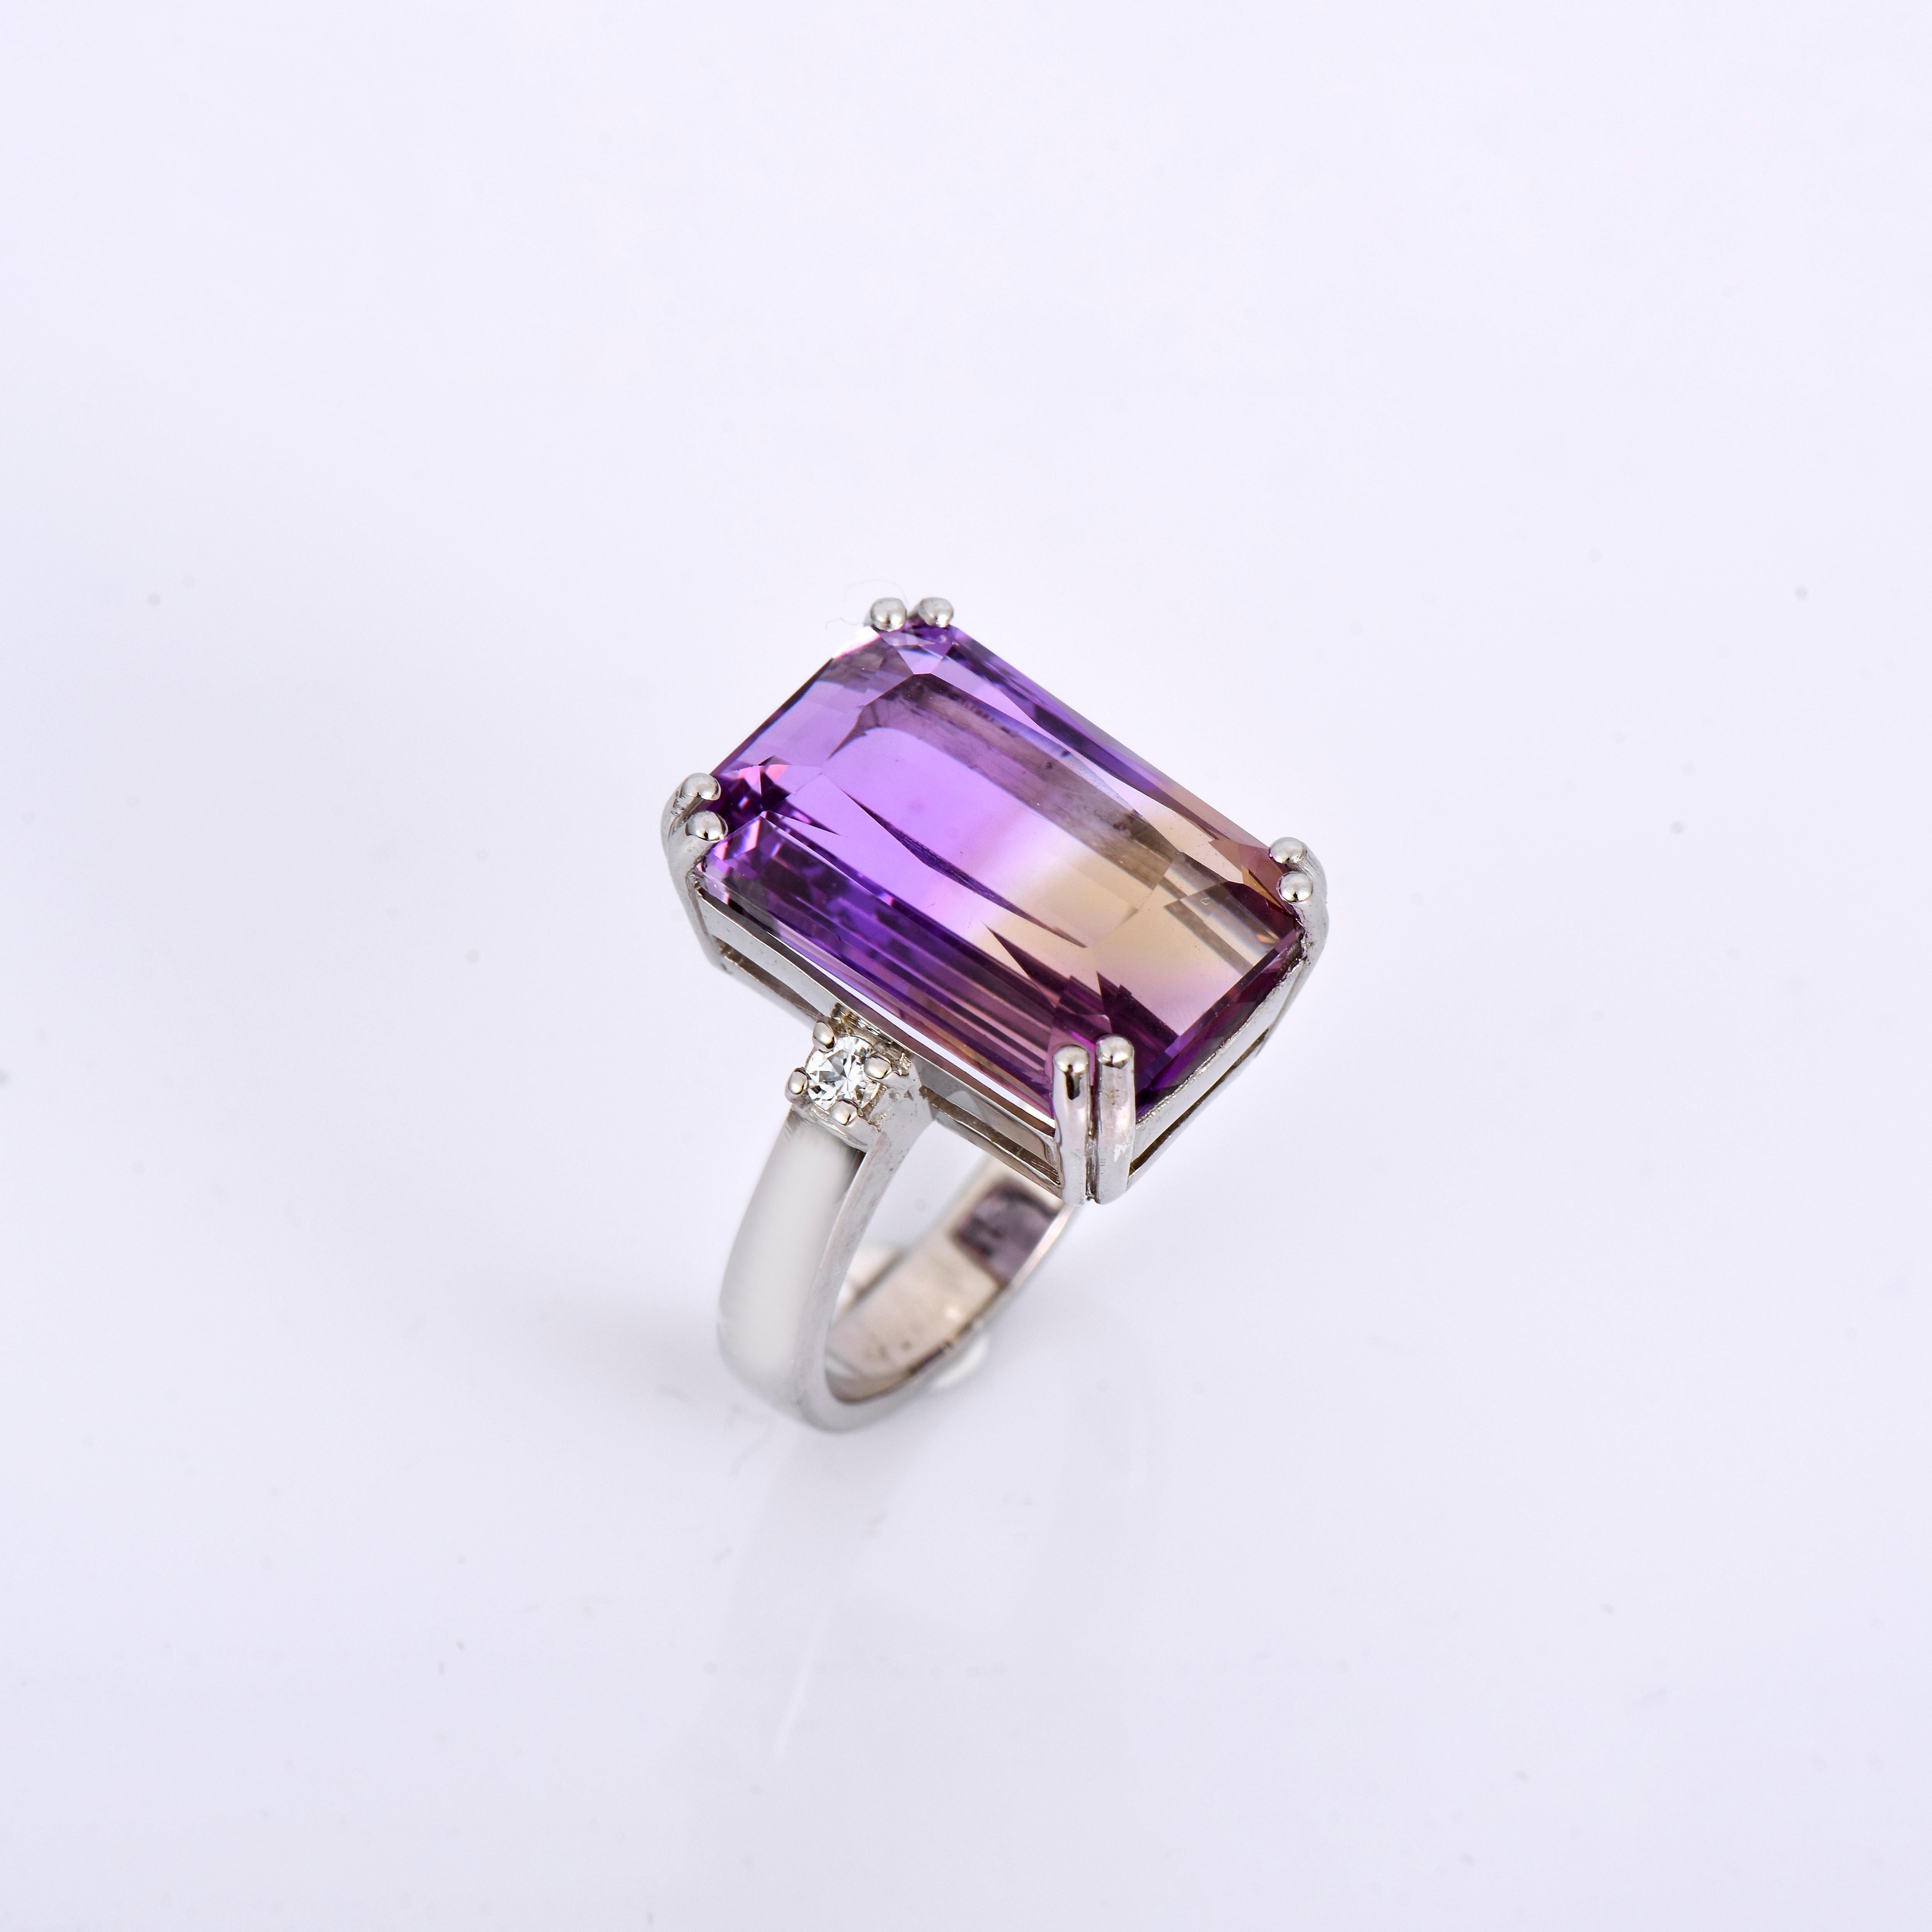 Orloff of Denmark; Ametrine Ring set with two white sapphires in 925 Sterling Silver.

A dazzling, handcrafted 925 sterling silver ring, crowned with a magnificent ametrine gemstone. Ametrine, a rare and natural convergence of amethyst and citrine,